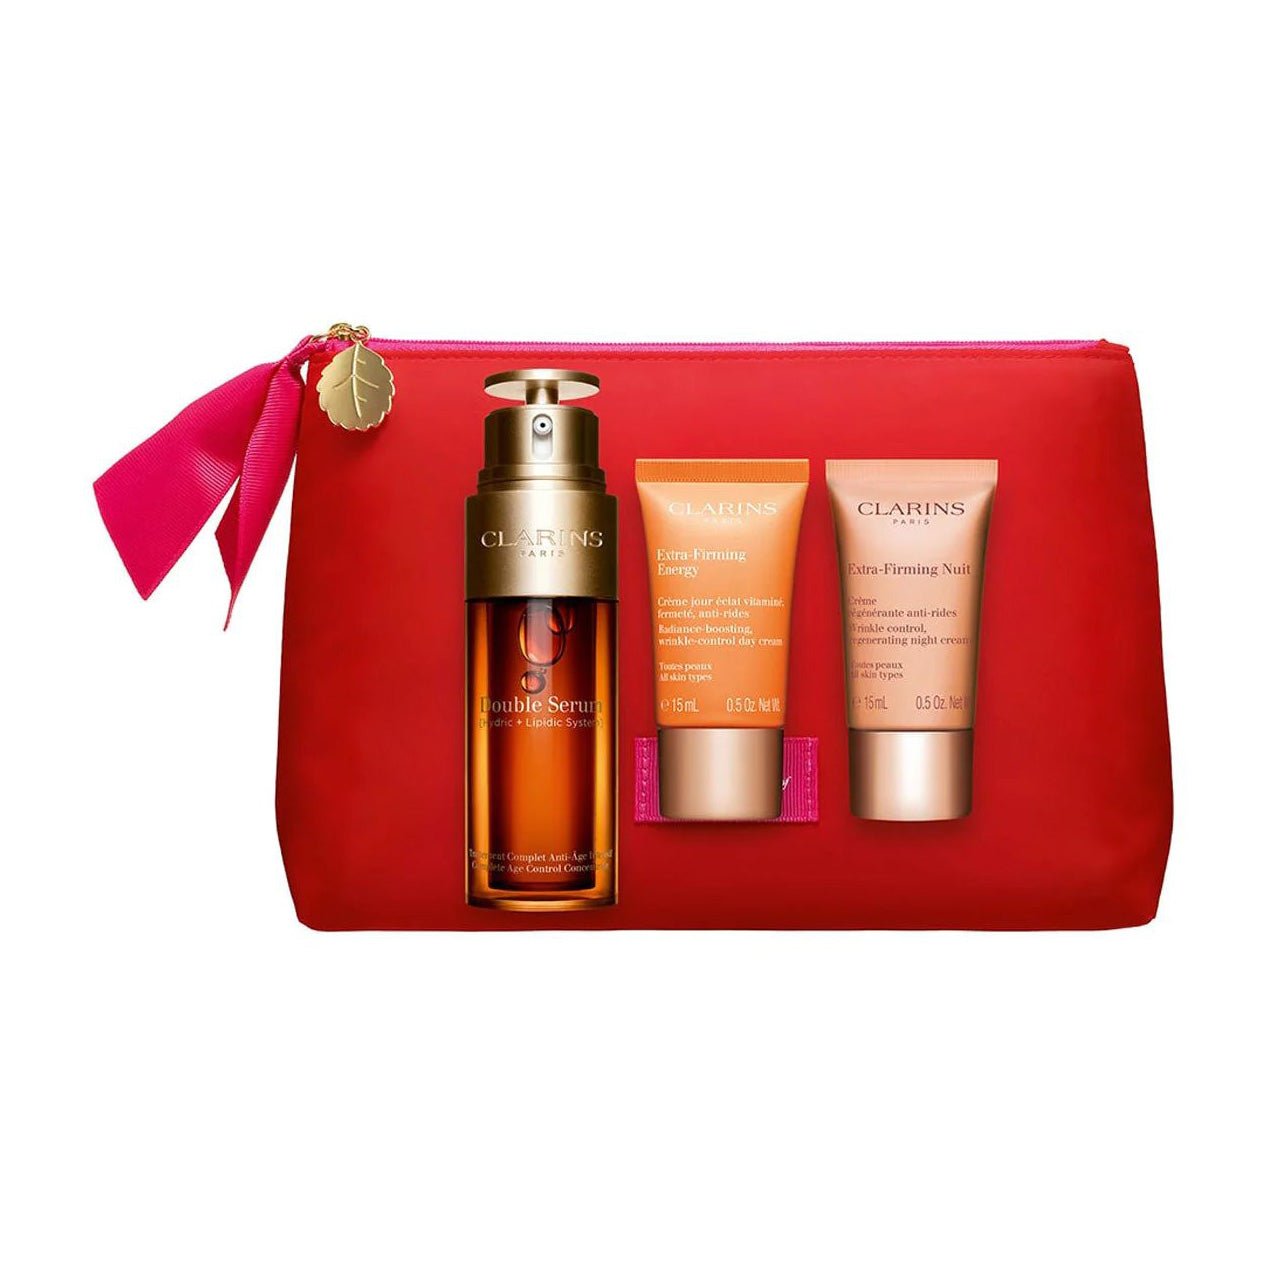 Clarins Double Serum & Extra Firming Gift Set - Bloom Pharmacy